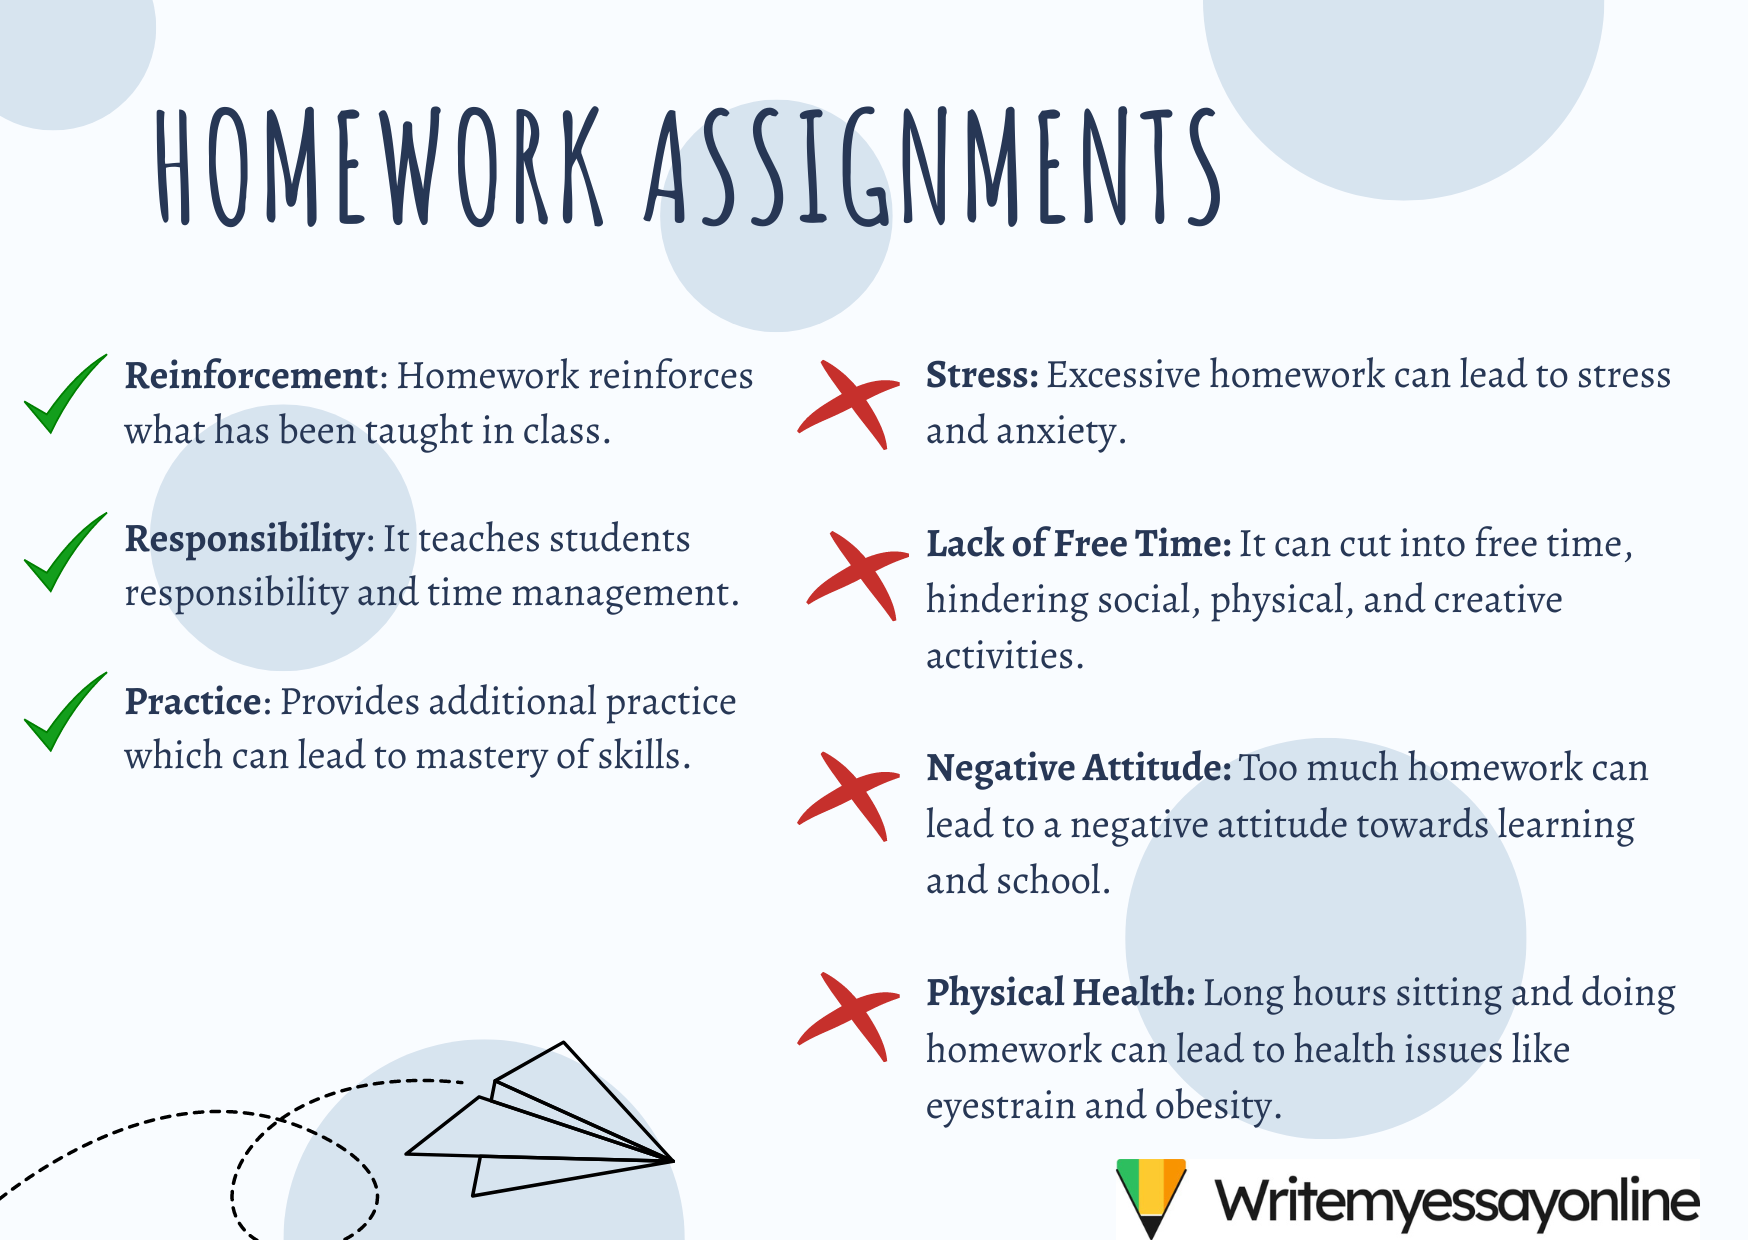 Benefits and Harms of Homework